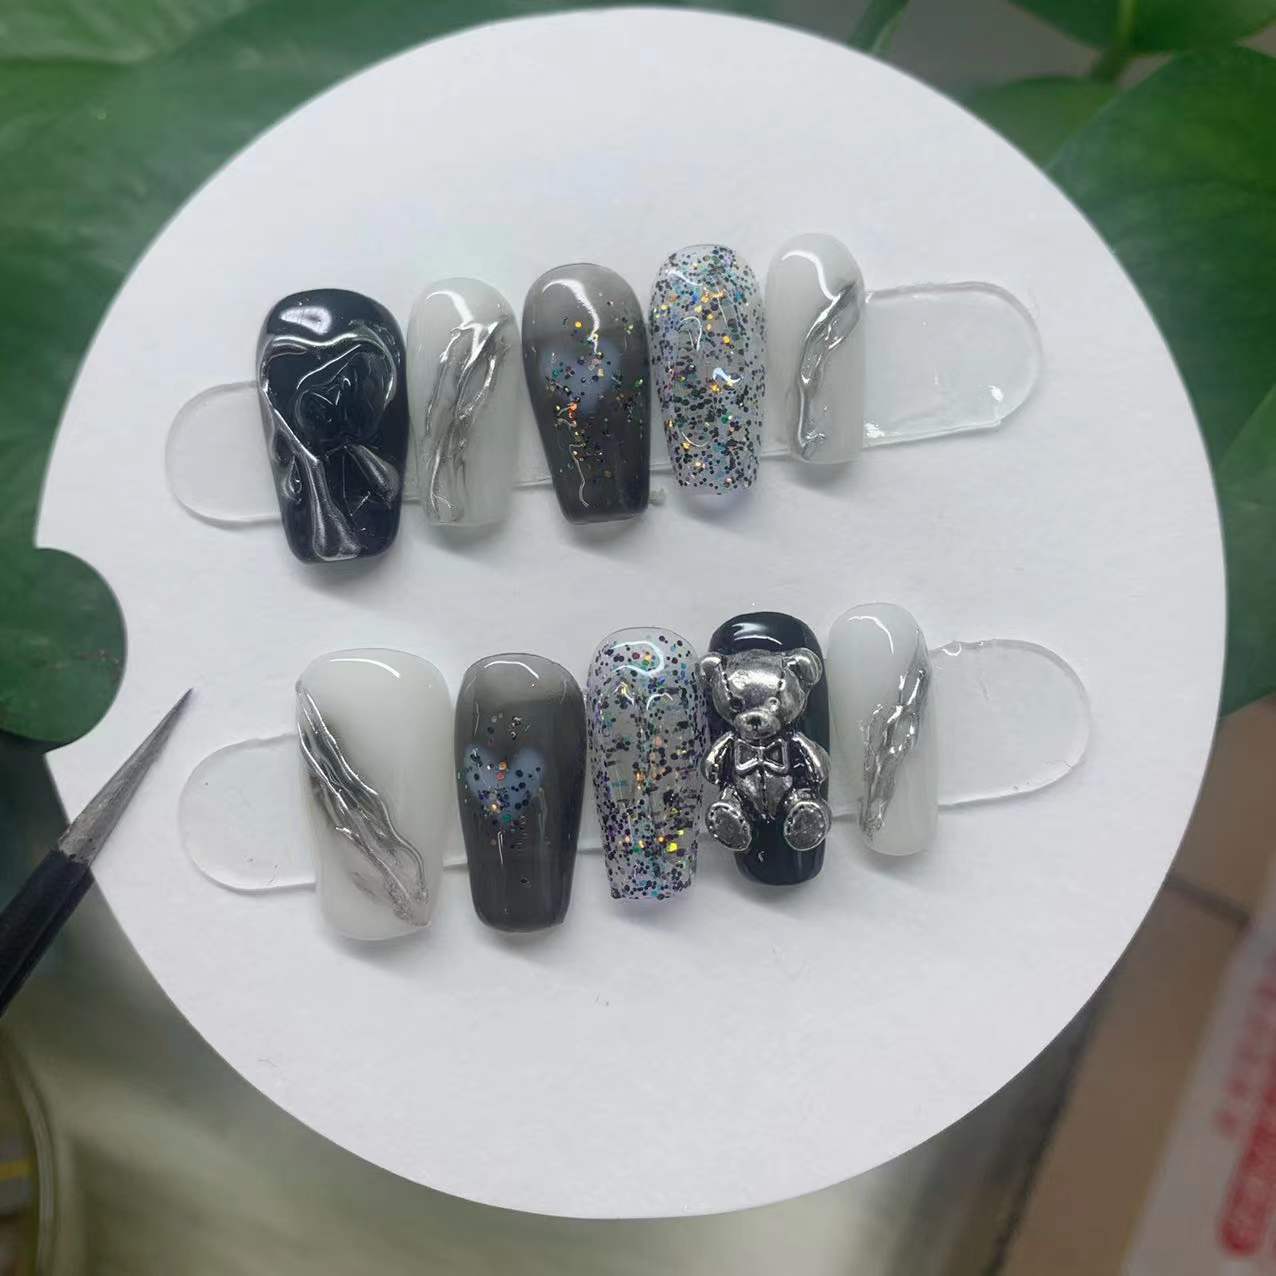 [Handmade] Wearing nail patch manicure nail patch finished product can be worn and dismantled fake nails ins manicure